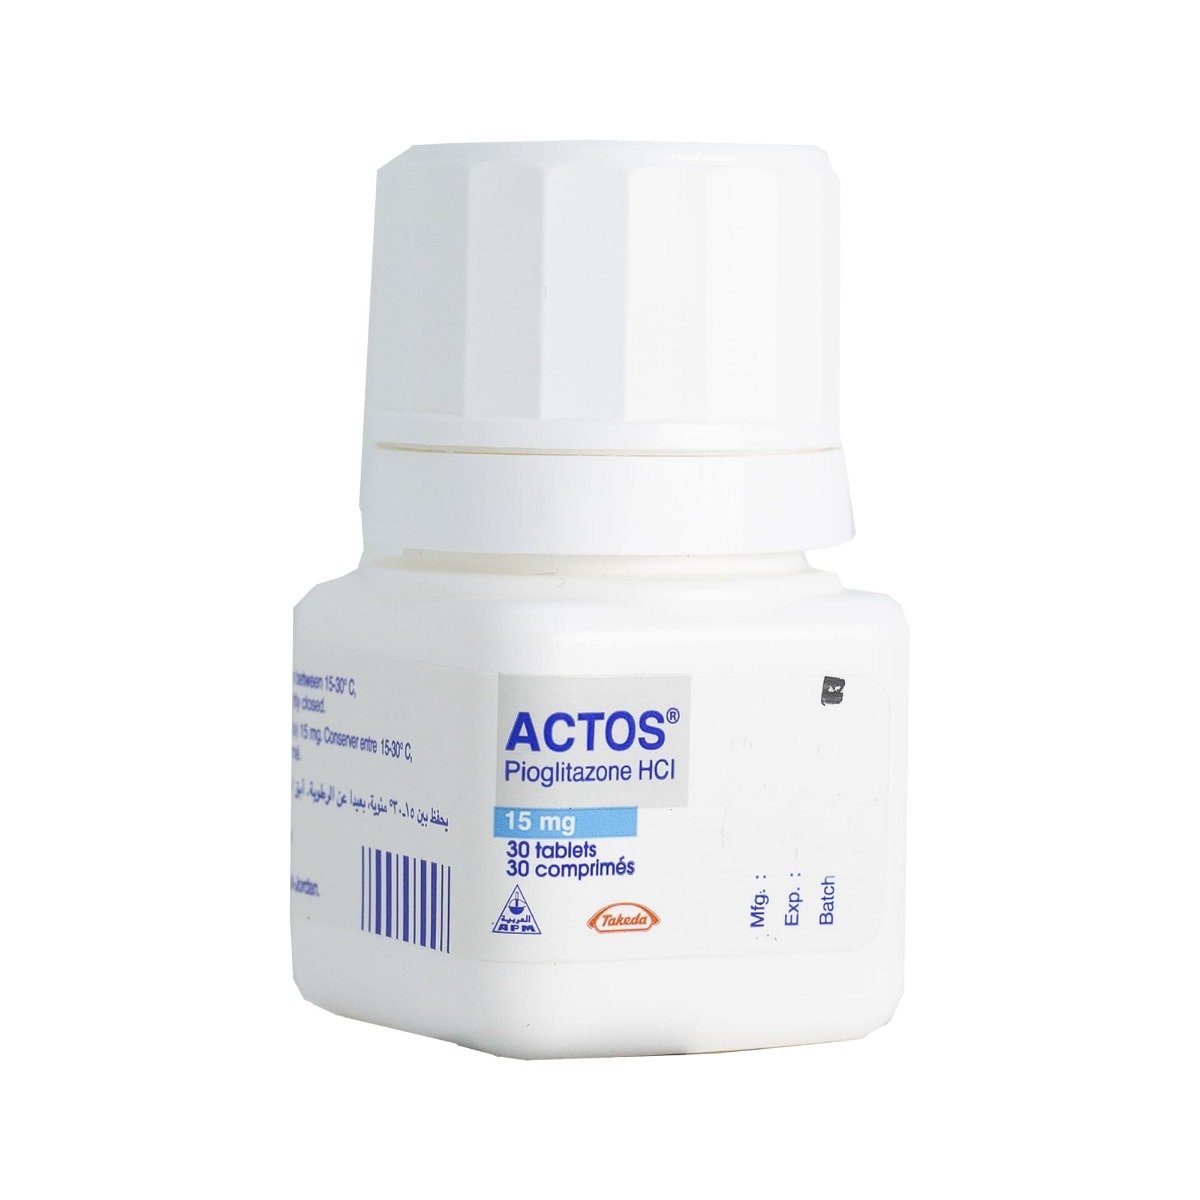 Actos 15 mg - 30 Tablets - Bloom Pharmacy